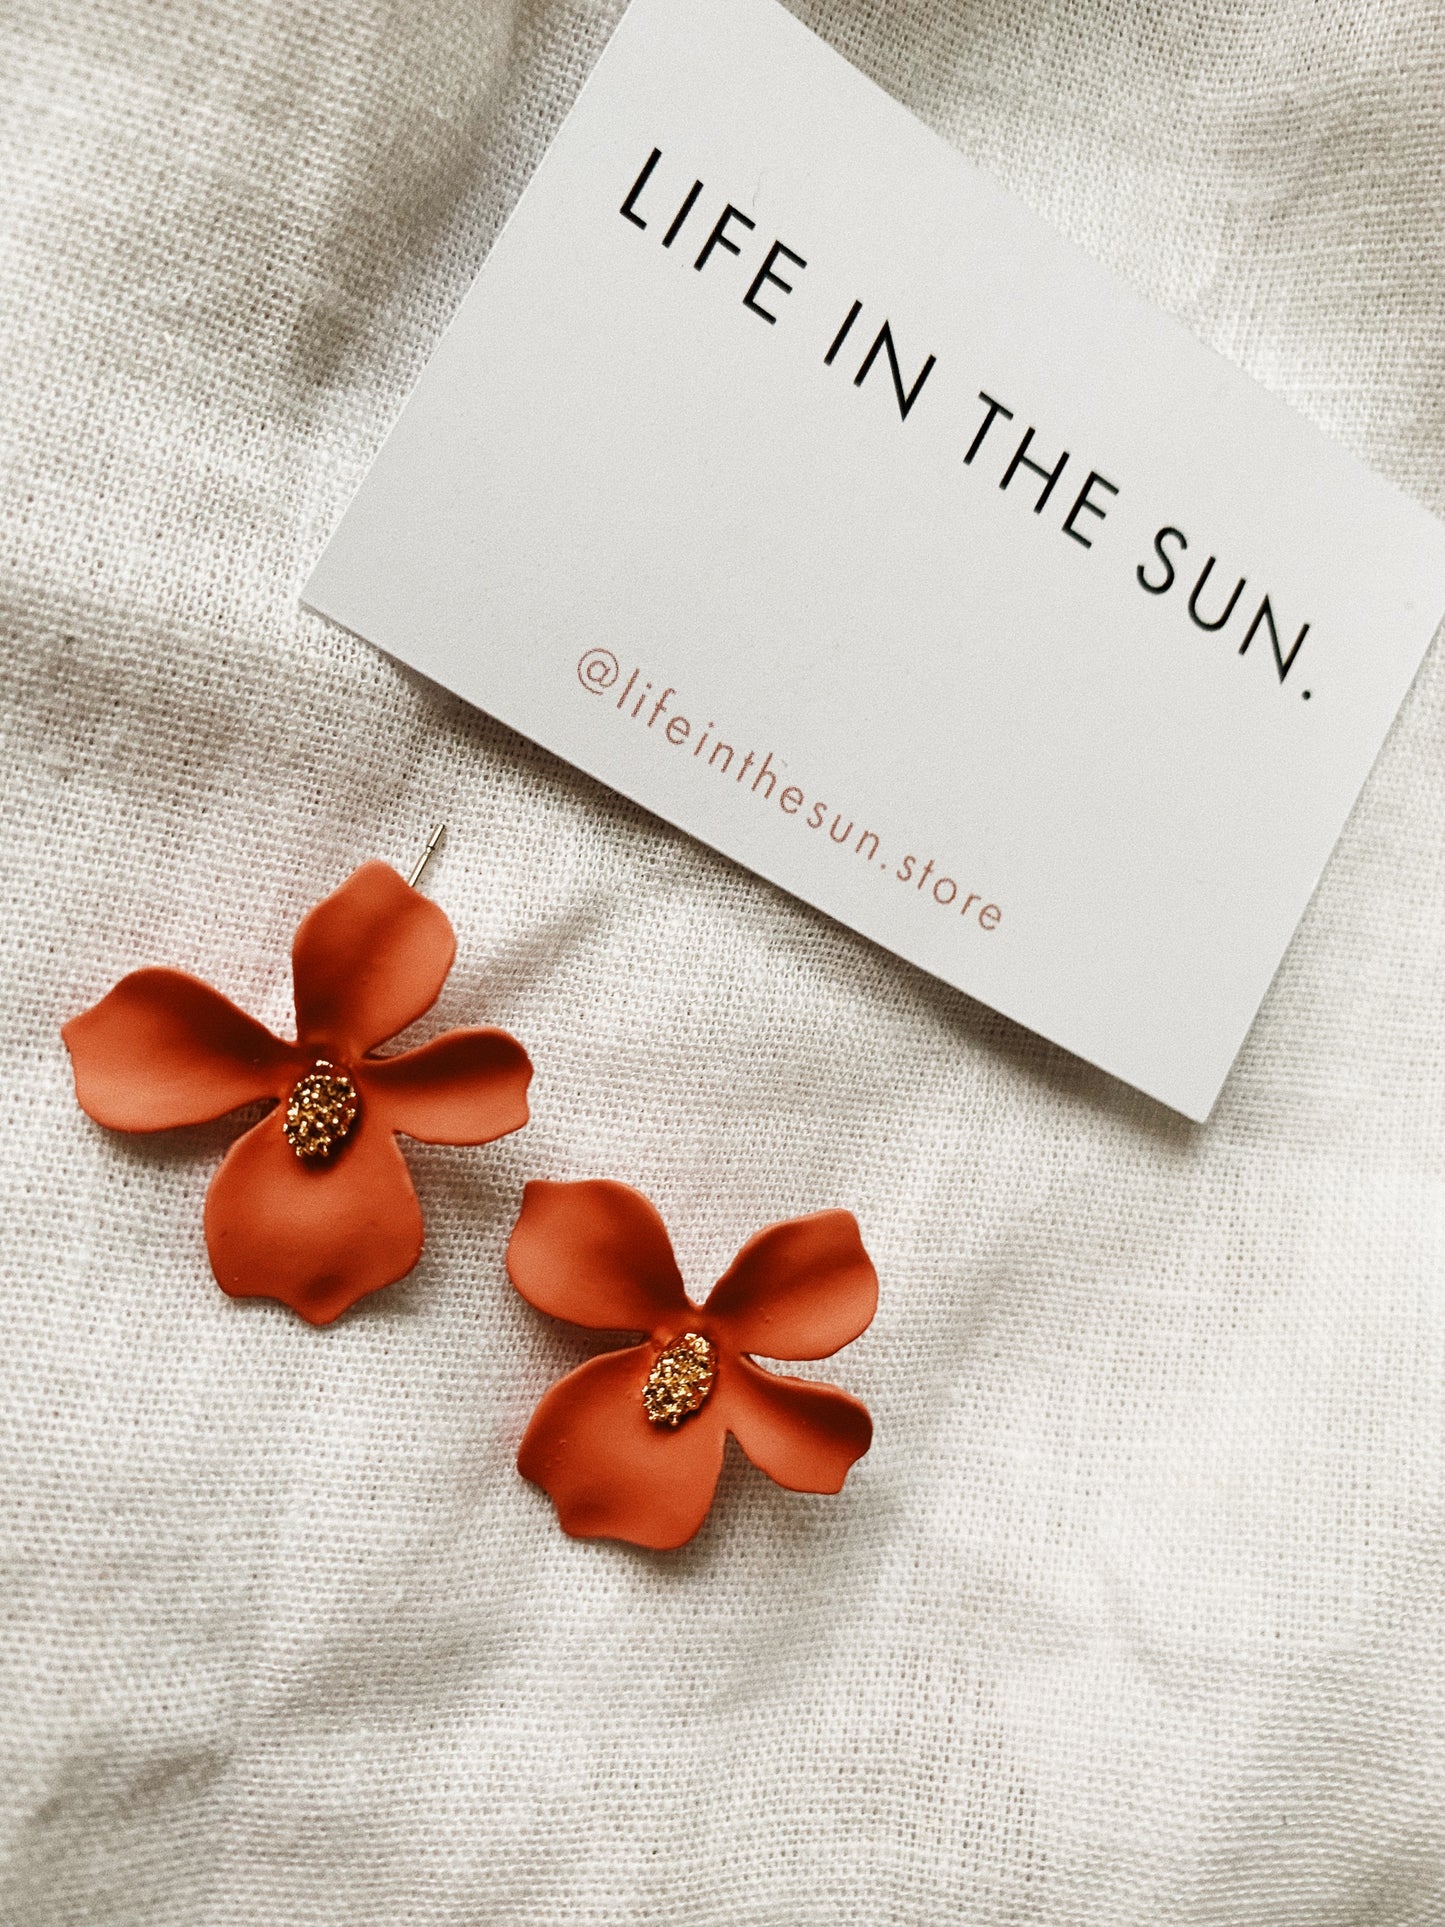 FLORA PINK Stud Earrings | By: Life in the sun store